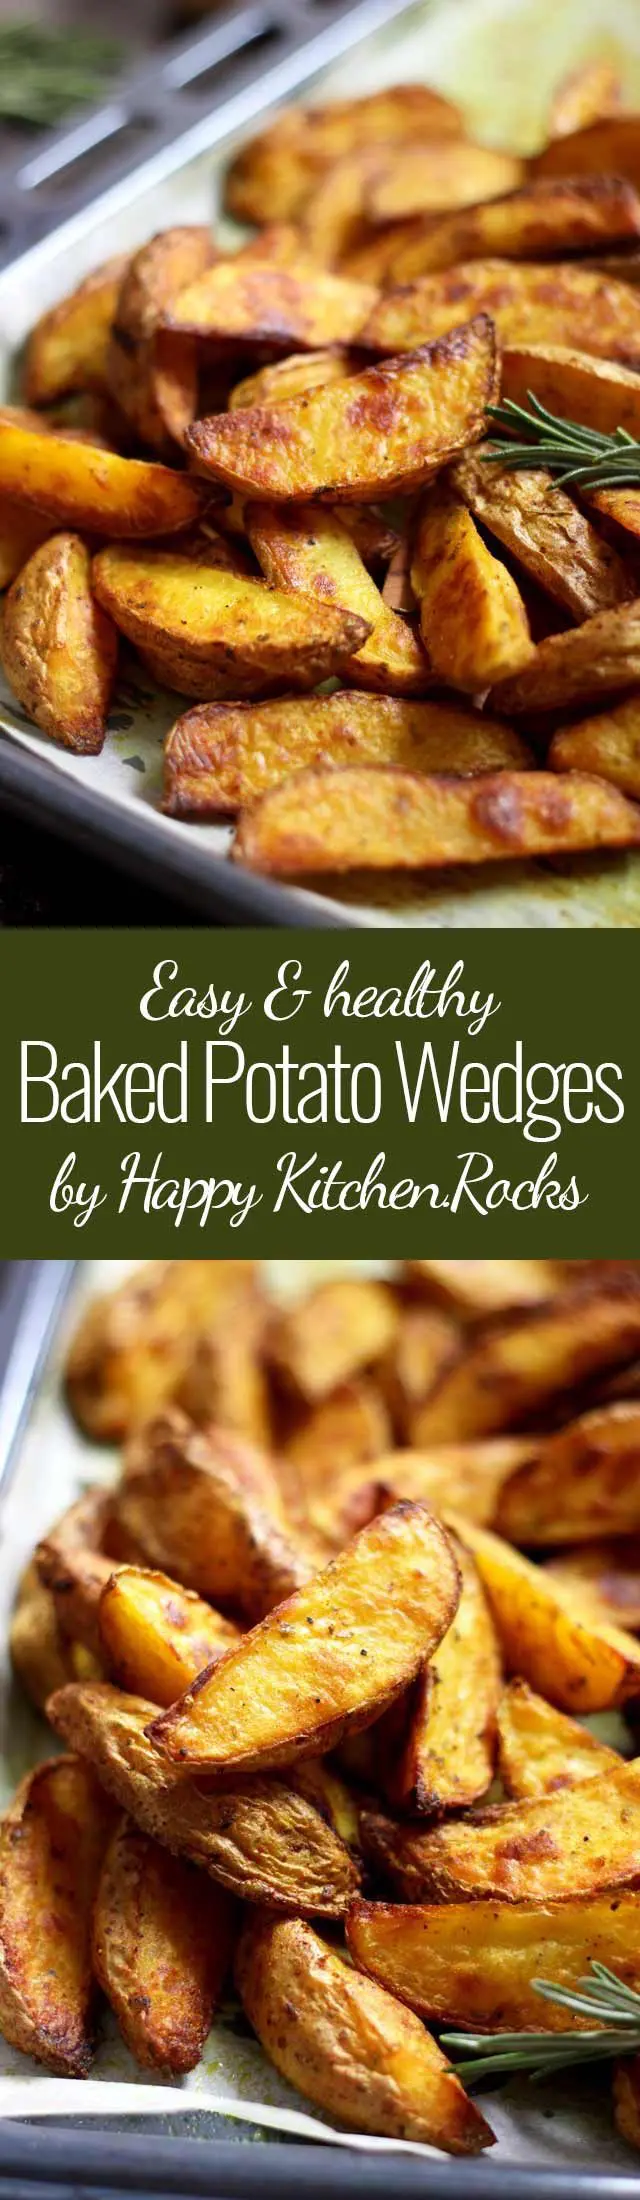 Easy Baked Potato Wedges Super Long Collage with Text Overlay